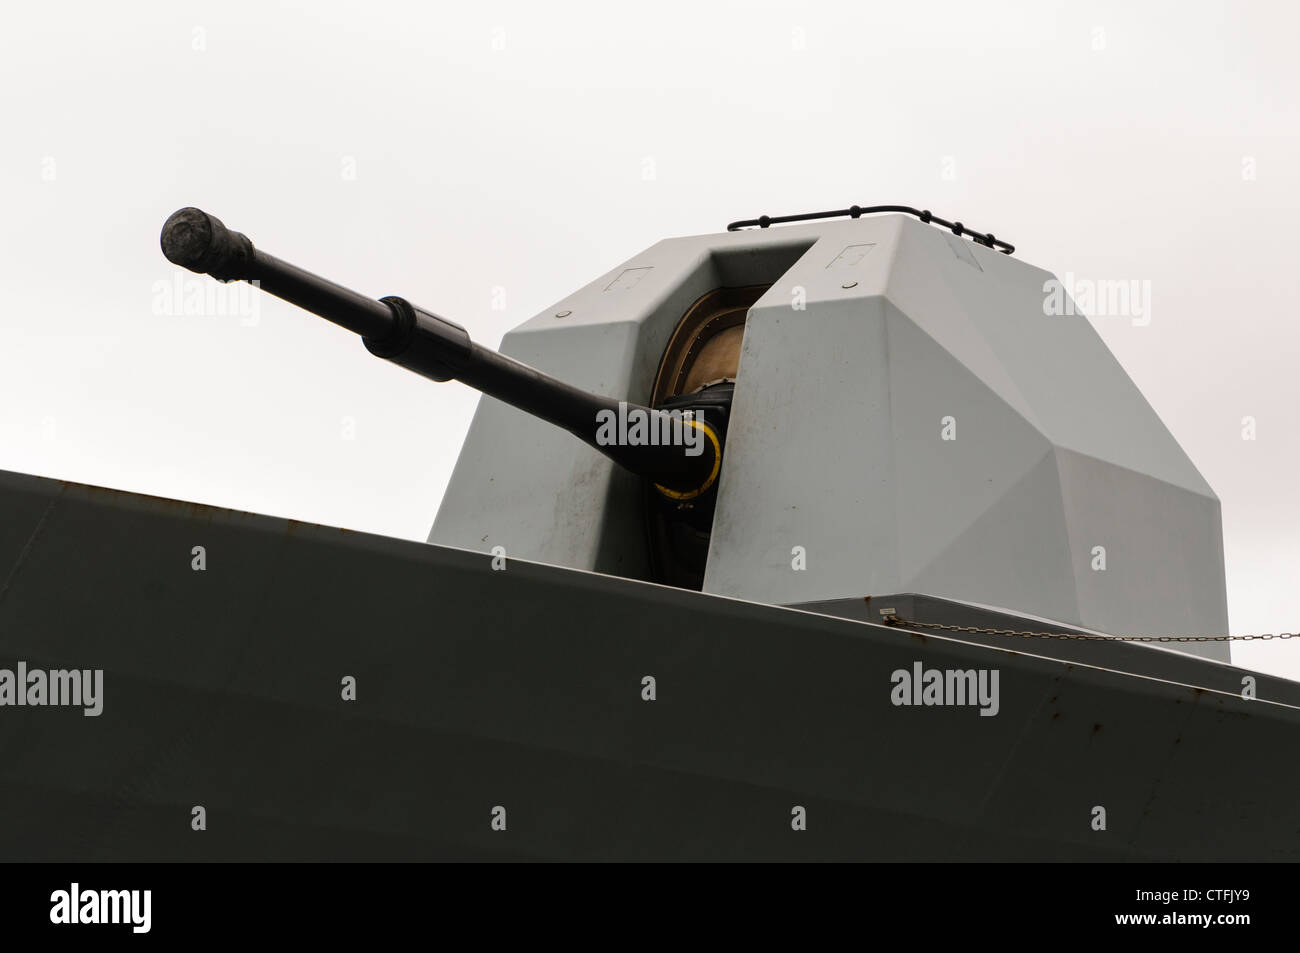 4.5 inch Mark 8 naval gun on a rotating turret on Royal Navy Type 45 destroyer HMS Dragon Stock Photo